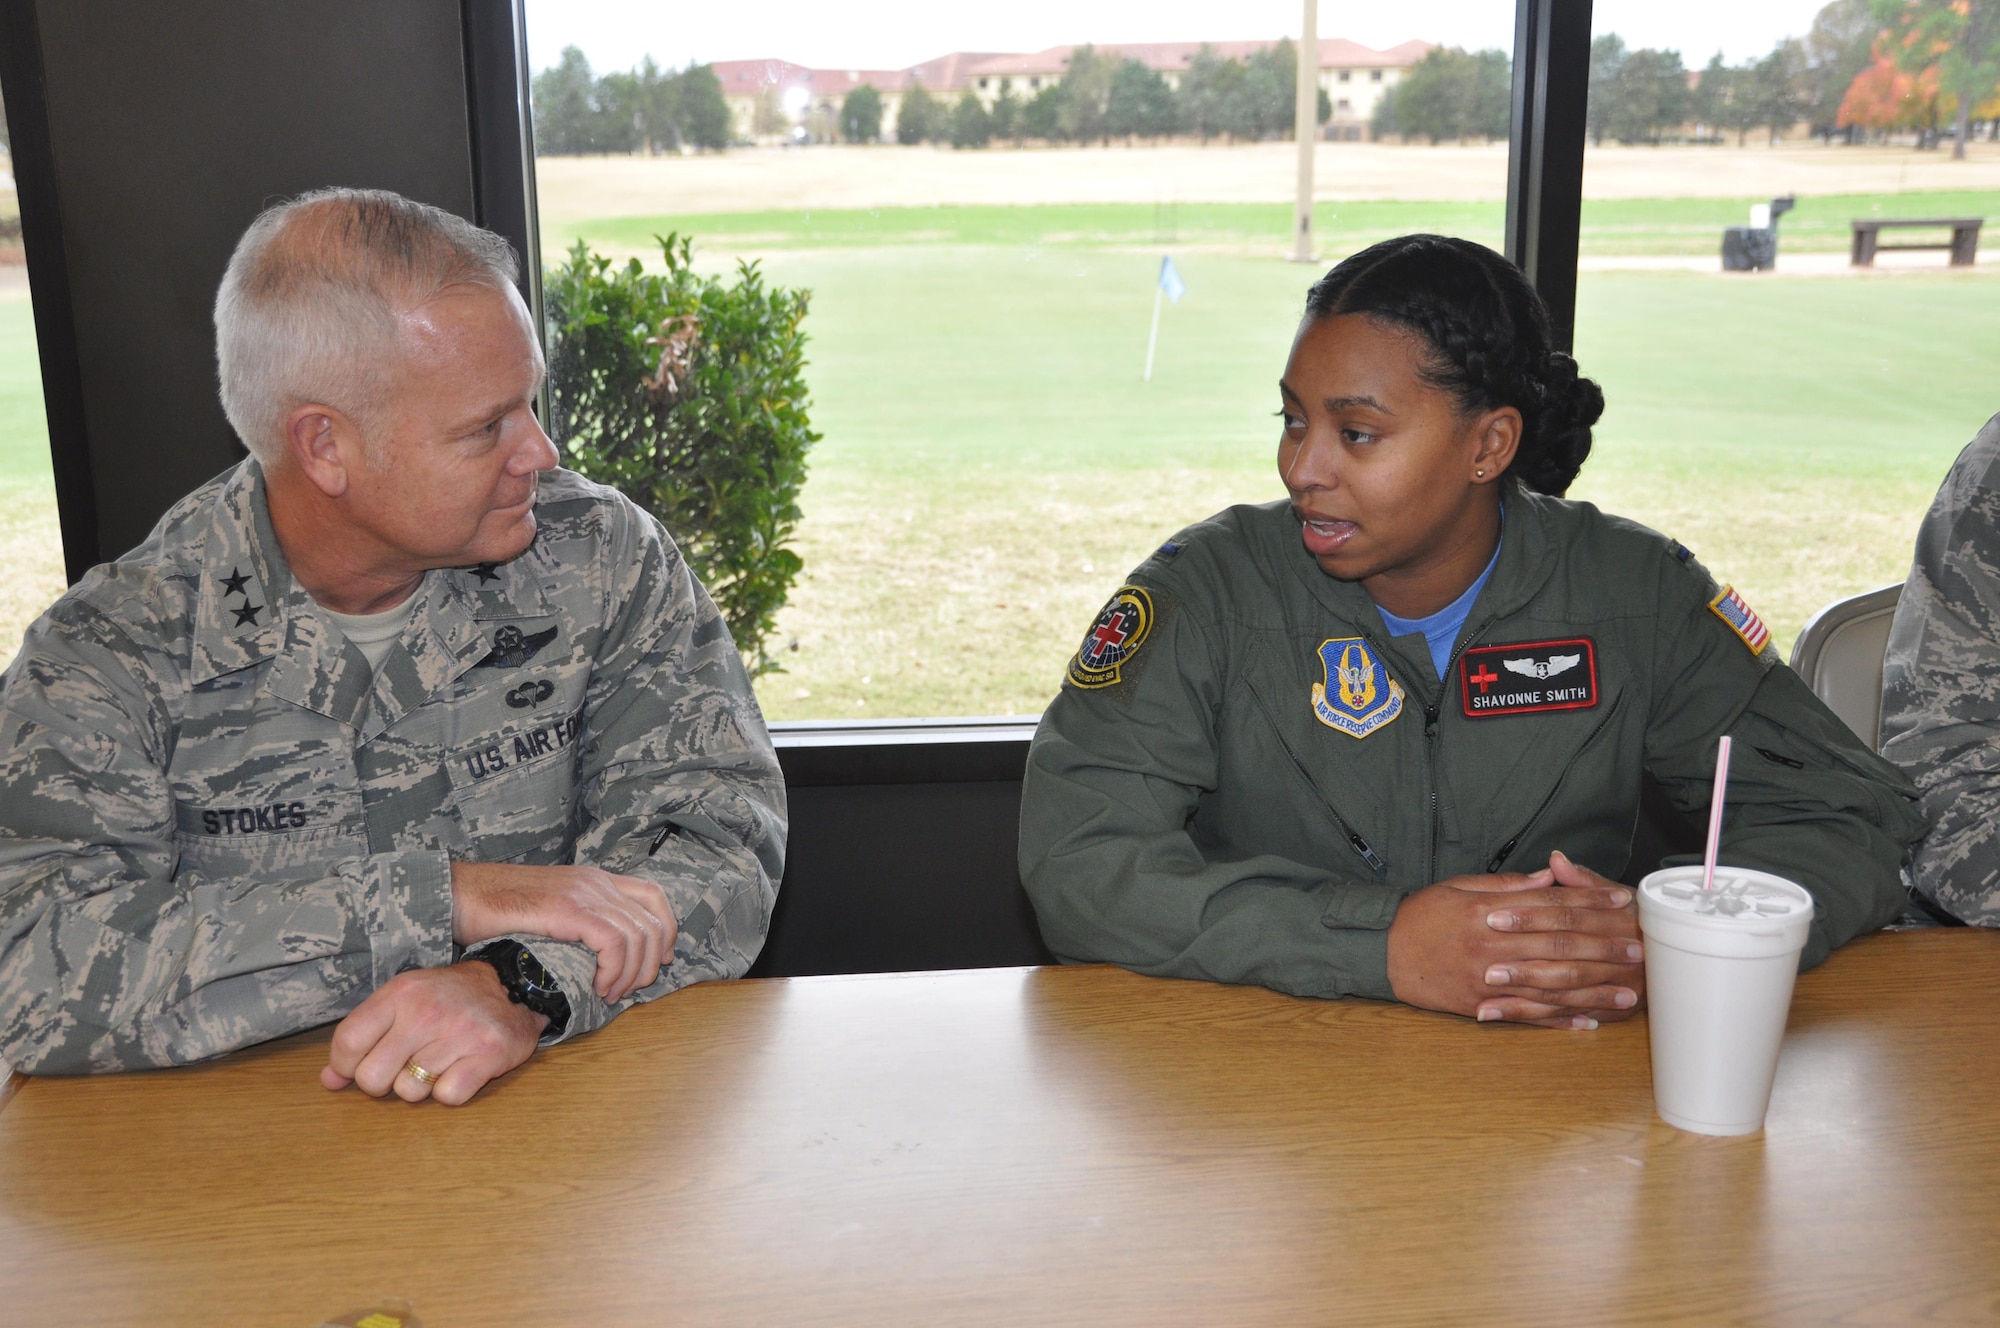 Commanding General of the 22nd Air Force, Maj. Gen. John Stokes, speaks with 1st Lt. Shavonne Smith, member of the Company Grade Officers Club while joing the club for a mentoring lunch Dec. 3 at Maxwell Air Force Base. Stokes came back to Maxwell to spend time with his old unit, the 908th Airlift Wing during the December Unit Training Assembly. (U.S. Air Force photo by Bradley J. Clark)